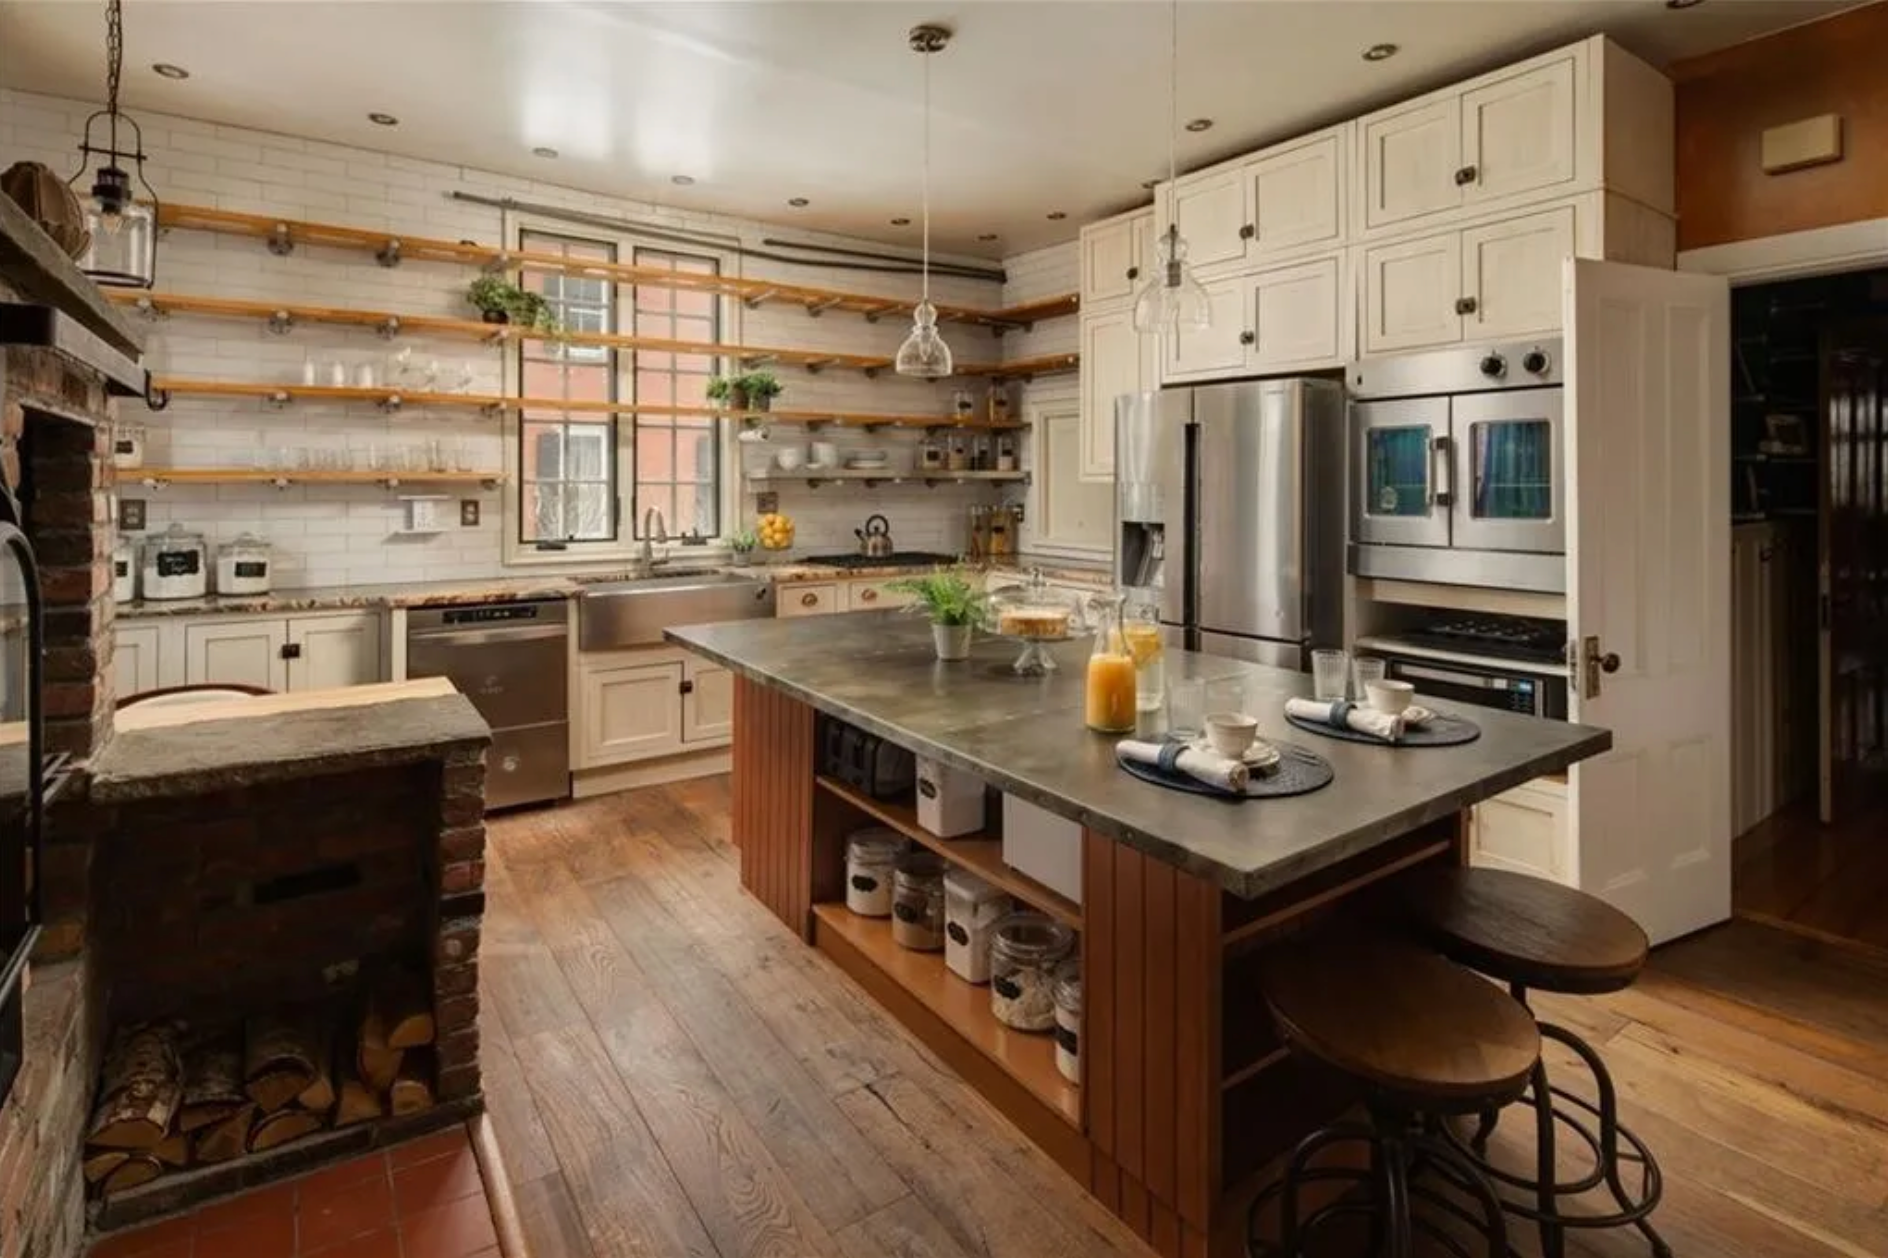 The kitchen has hardwood floors and stainless steel appliances, as well as cream shaker-style cabinets and exposed wooden floating shelves.